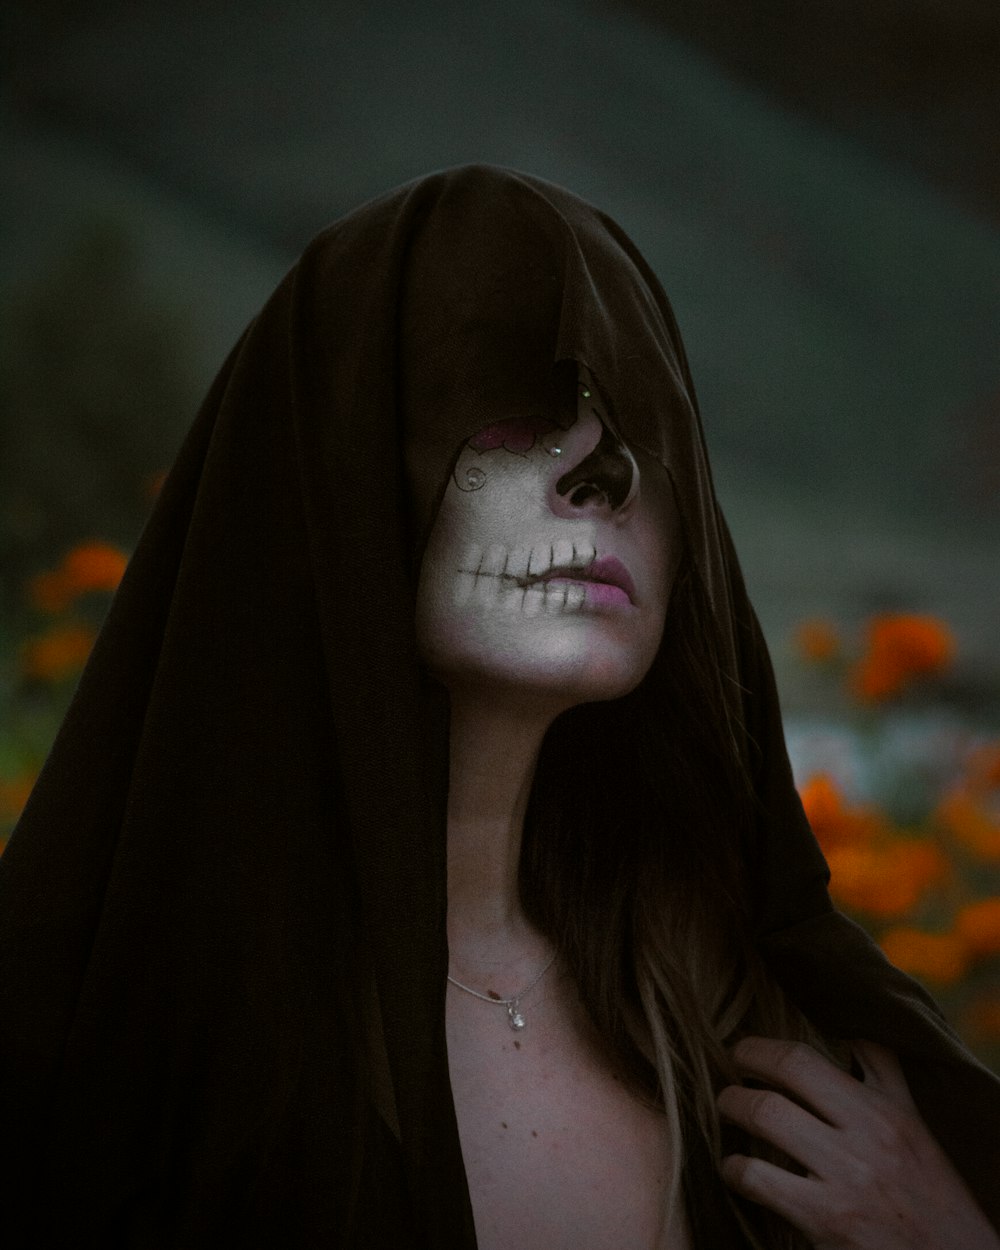 a woman with a skeleton face painted on her face